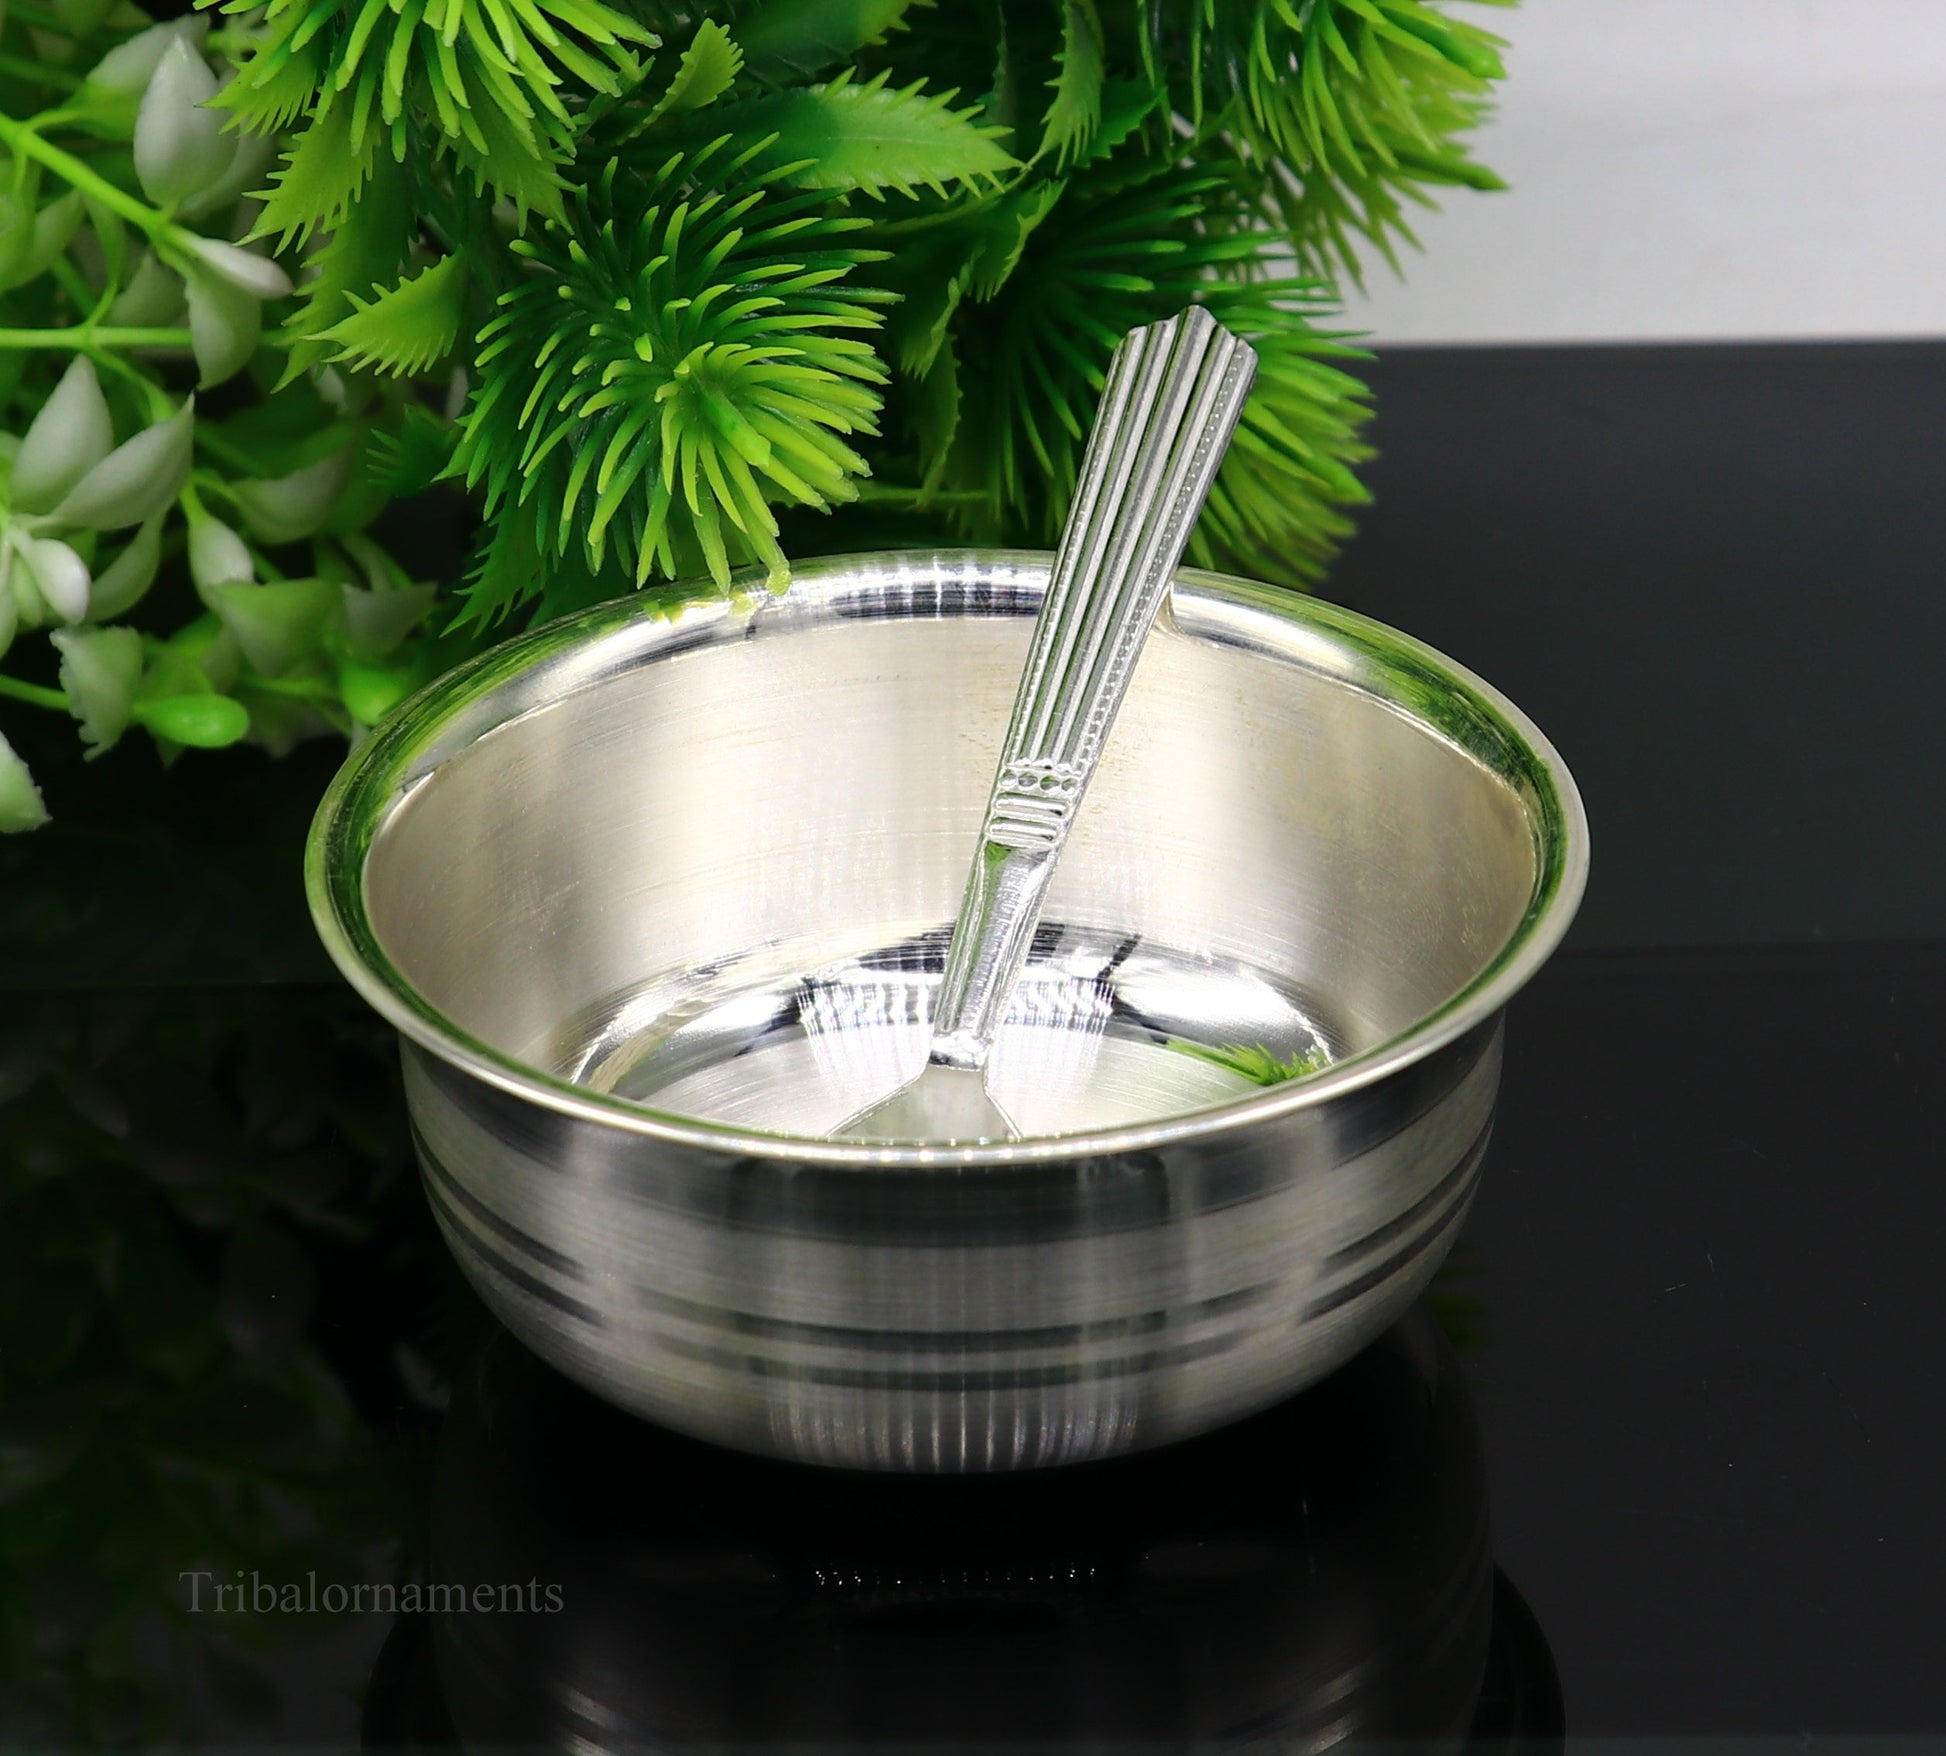 999 fine solid silver handmade small bowl for baby serving, pure silver vessel, silver utensils, home kitchen accessories puja bowl sv224 - TRIBAL ORNAMENTS